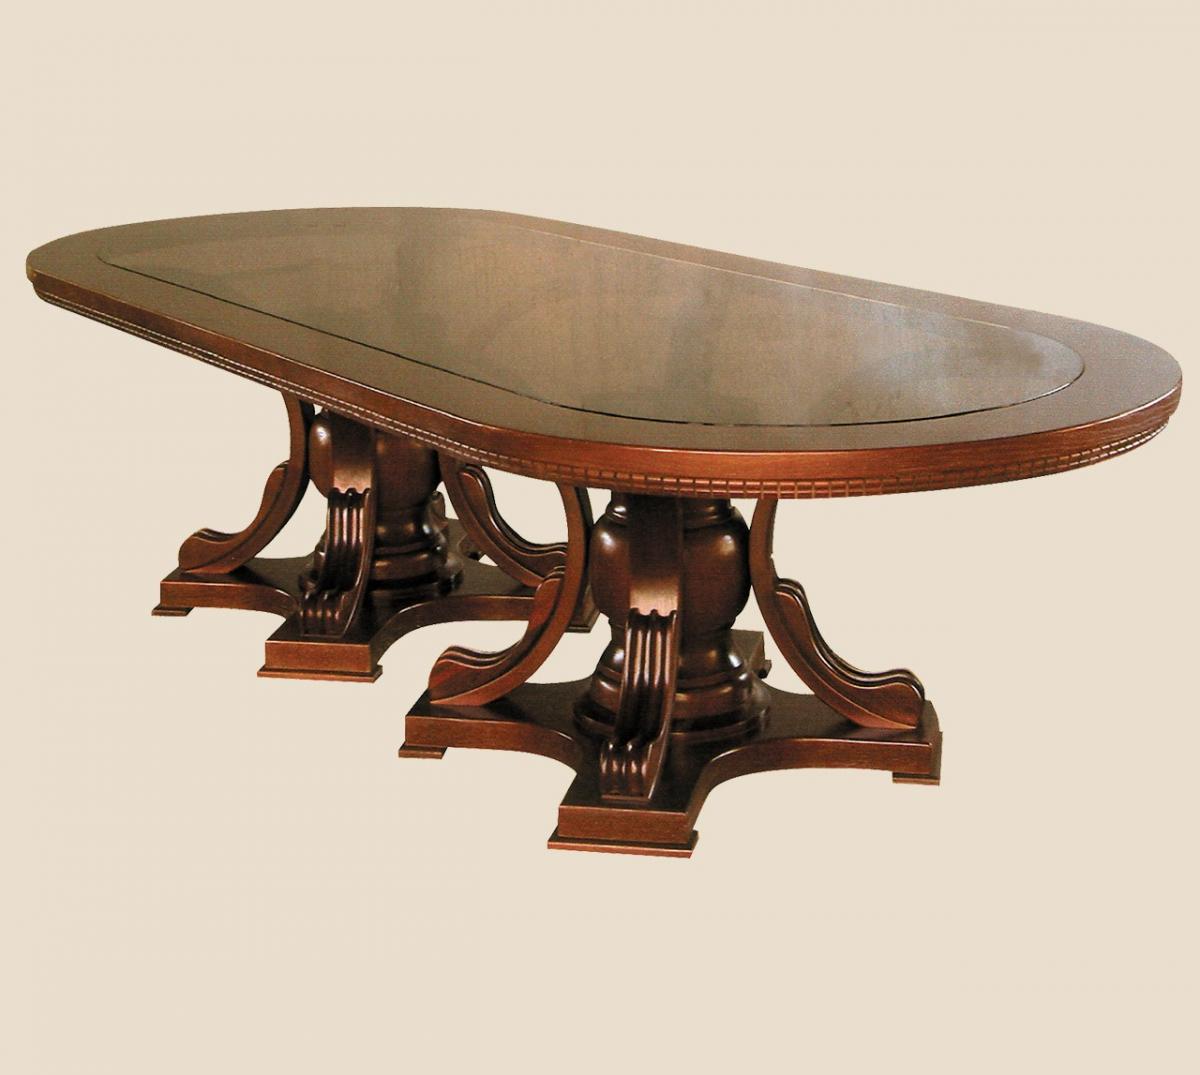 Table "Grand"